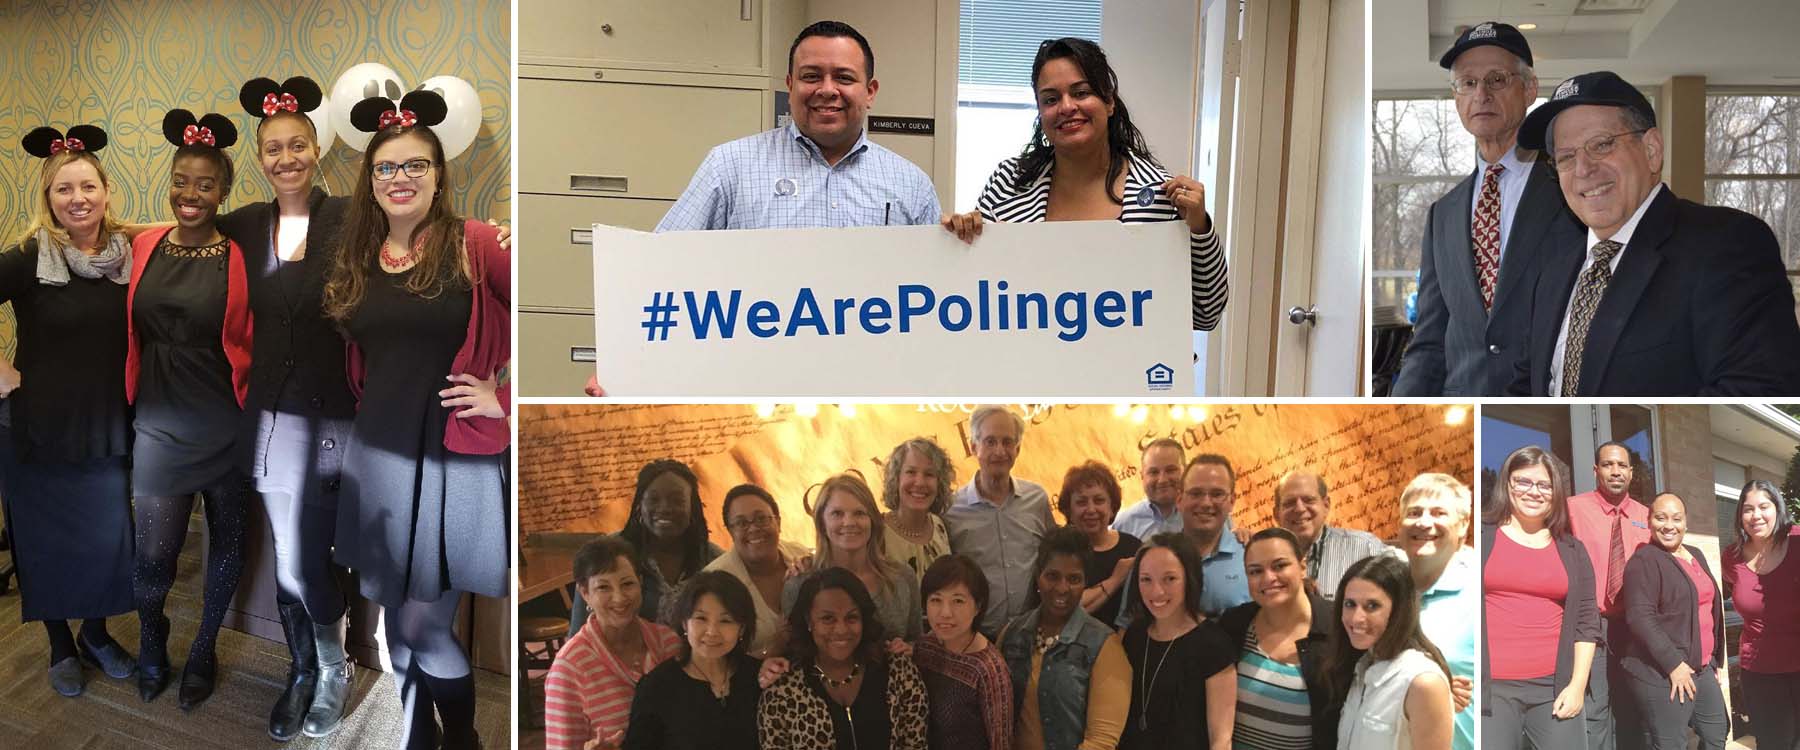 A collage of Polinger employees